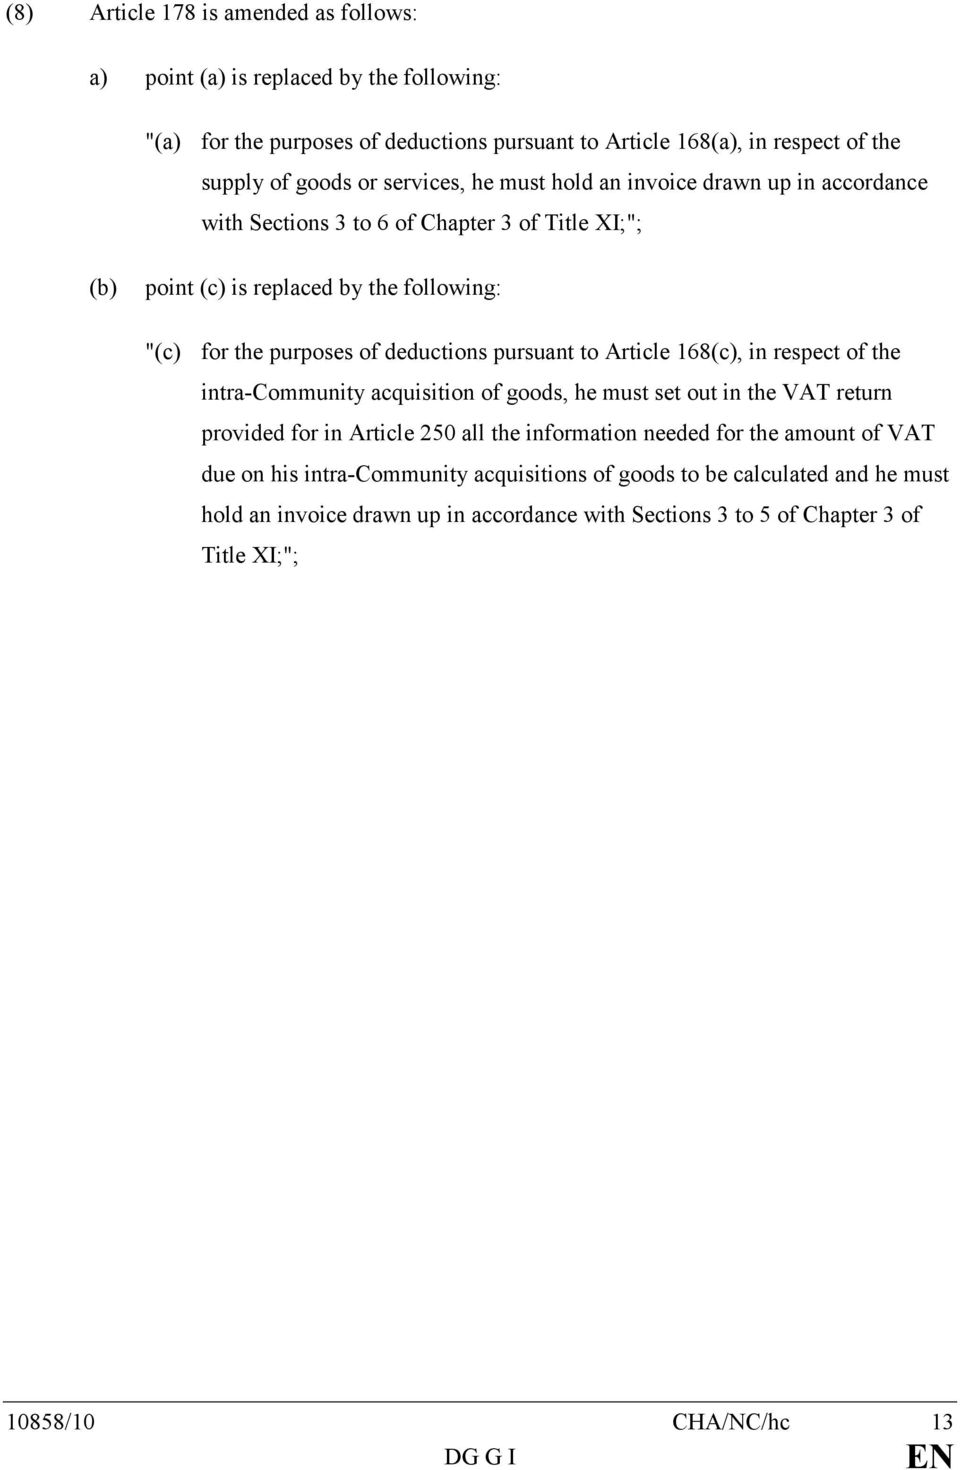 pursuant to Article 168(c), in respect of the intra-community acquisition of goods, he must set out in the VAT return provided for in Article 250 all the information needed for the amount